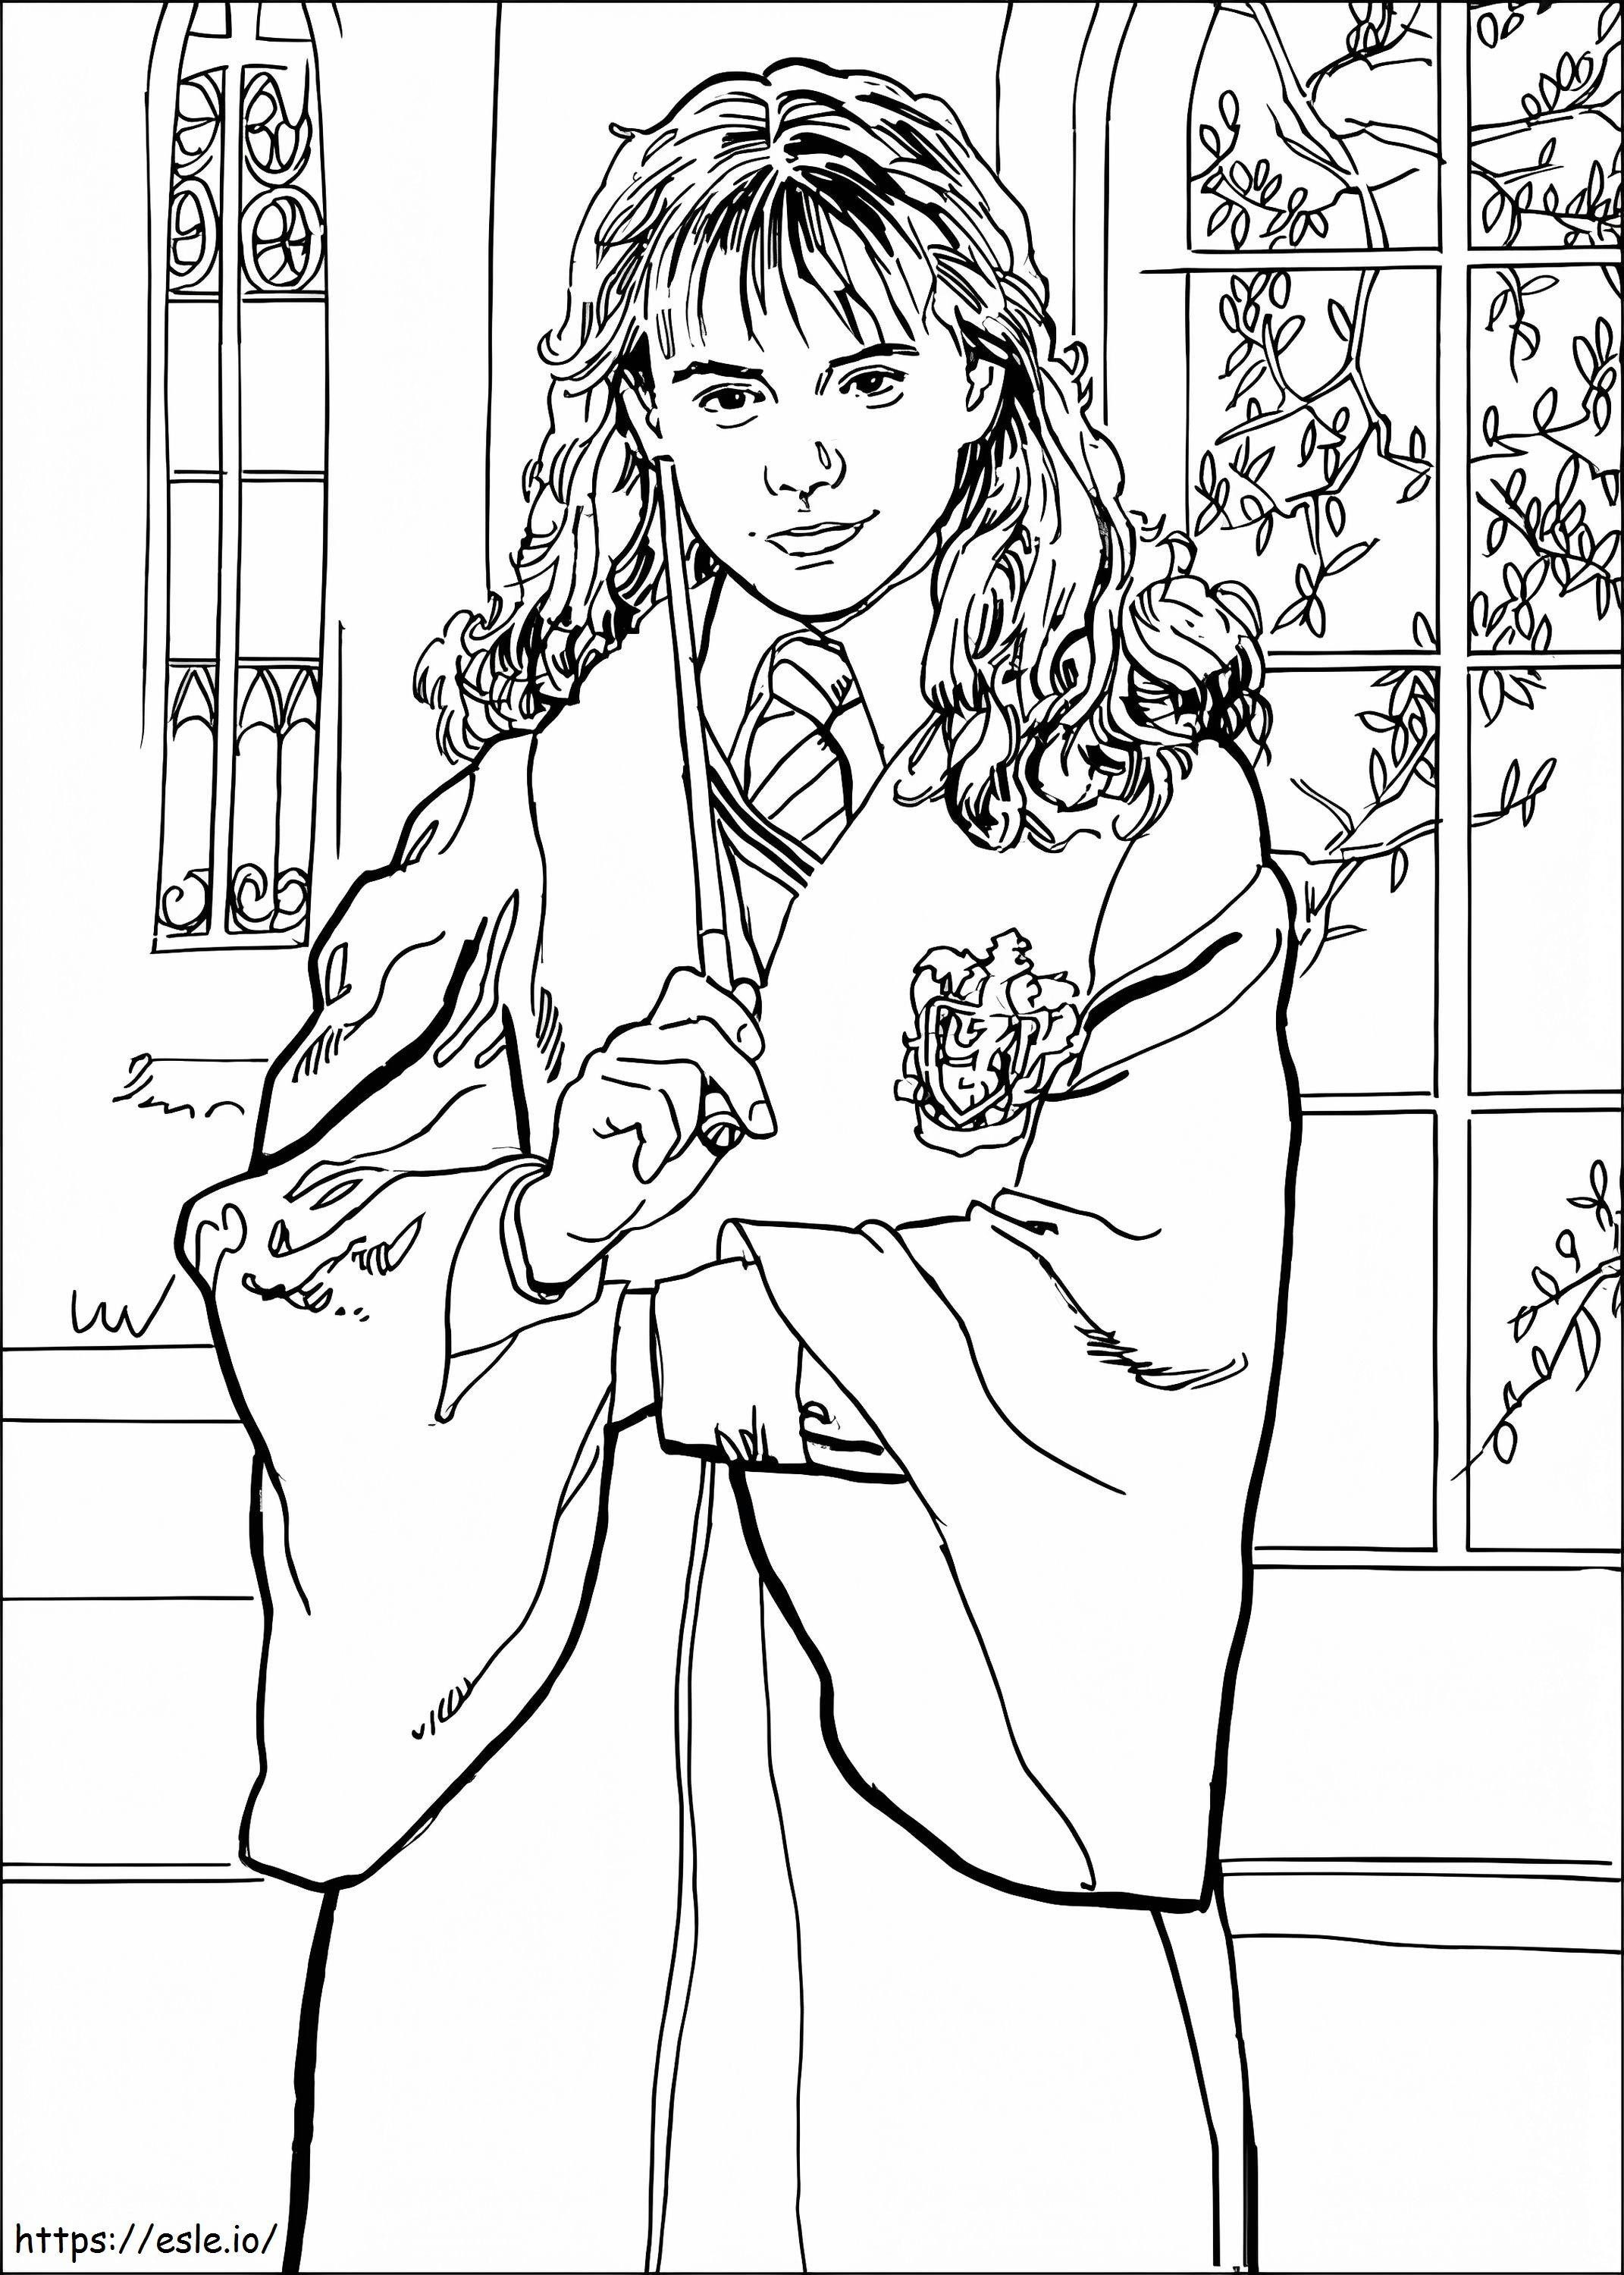 Cool Hermione coloring page